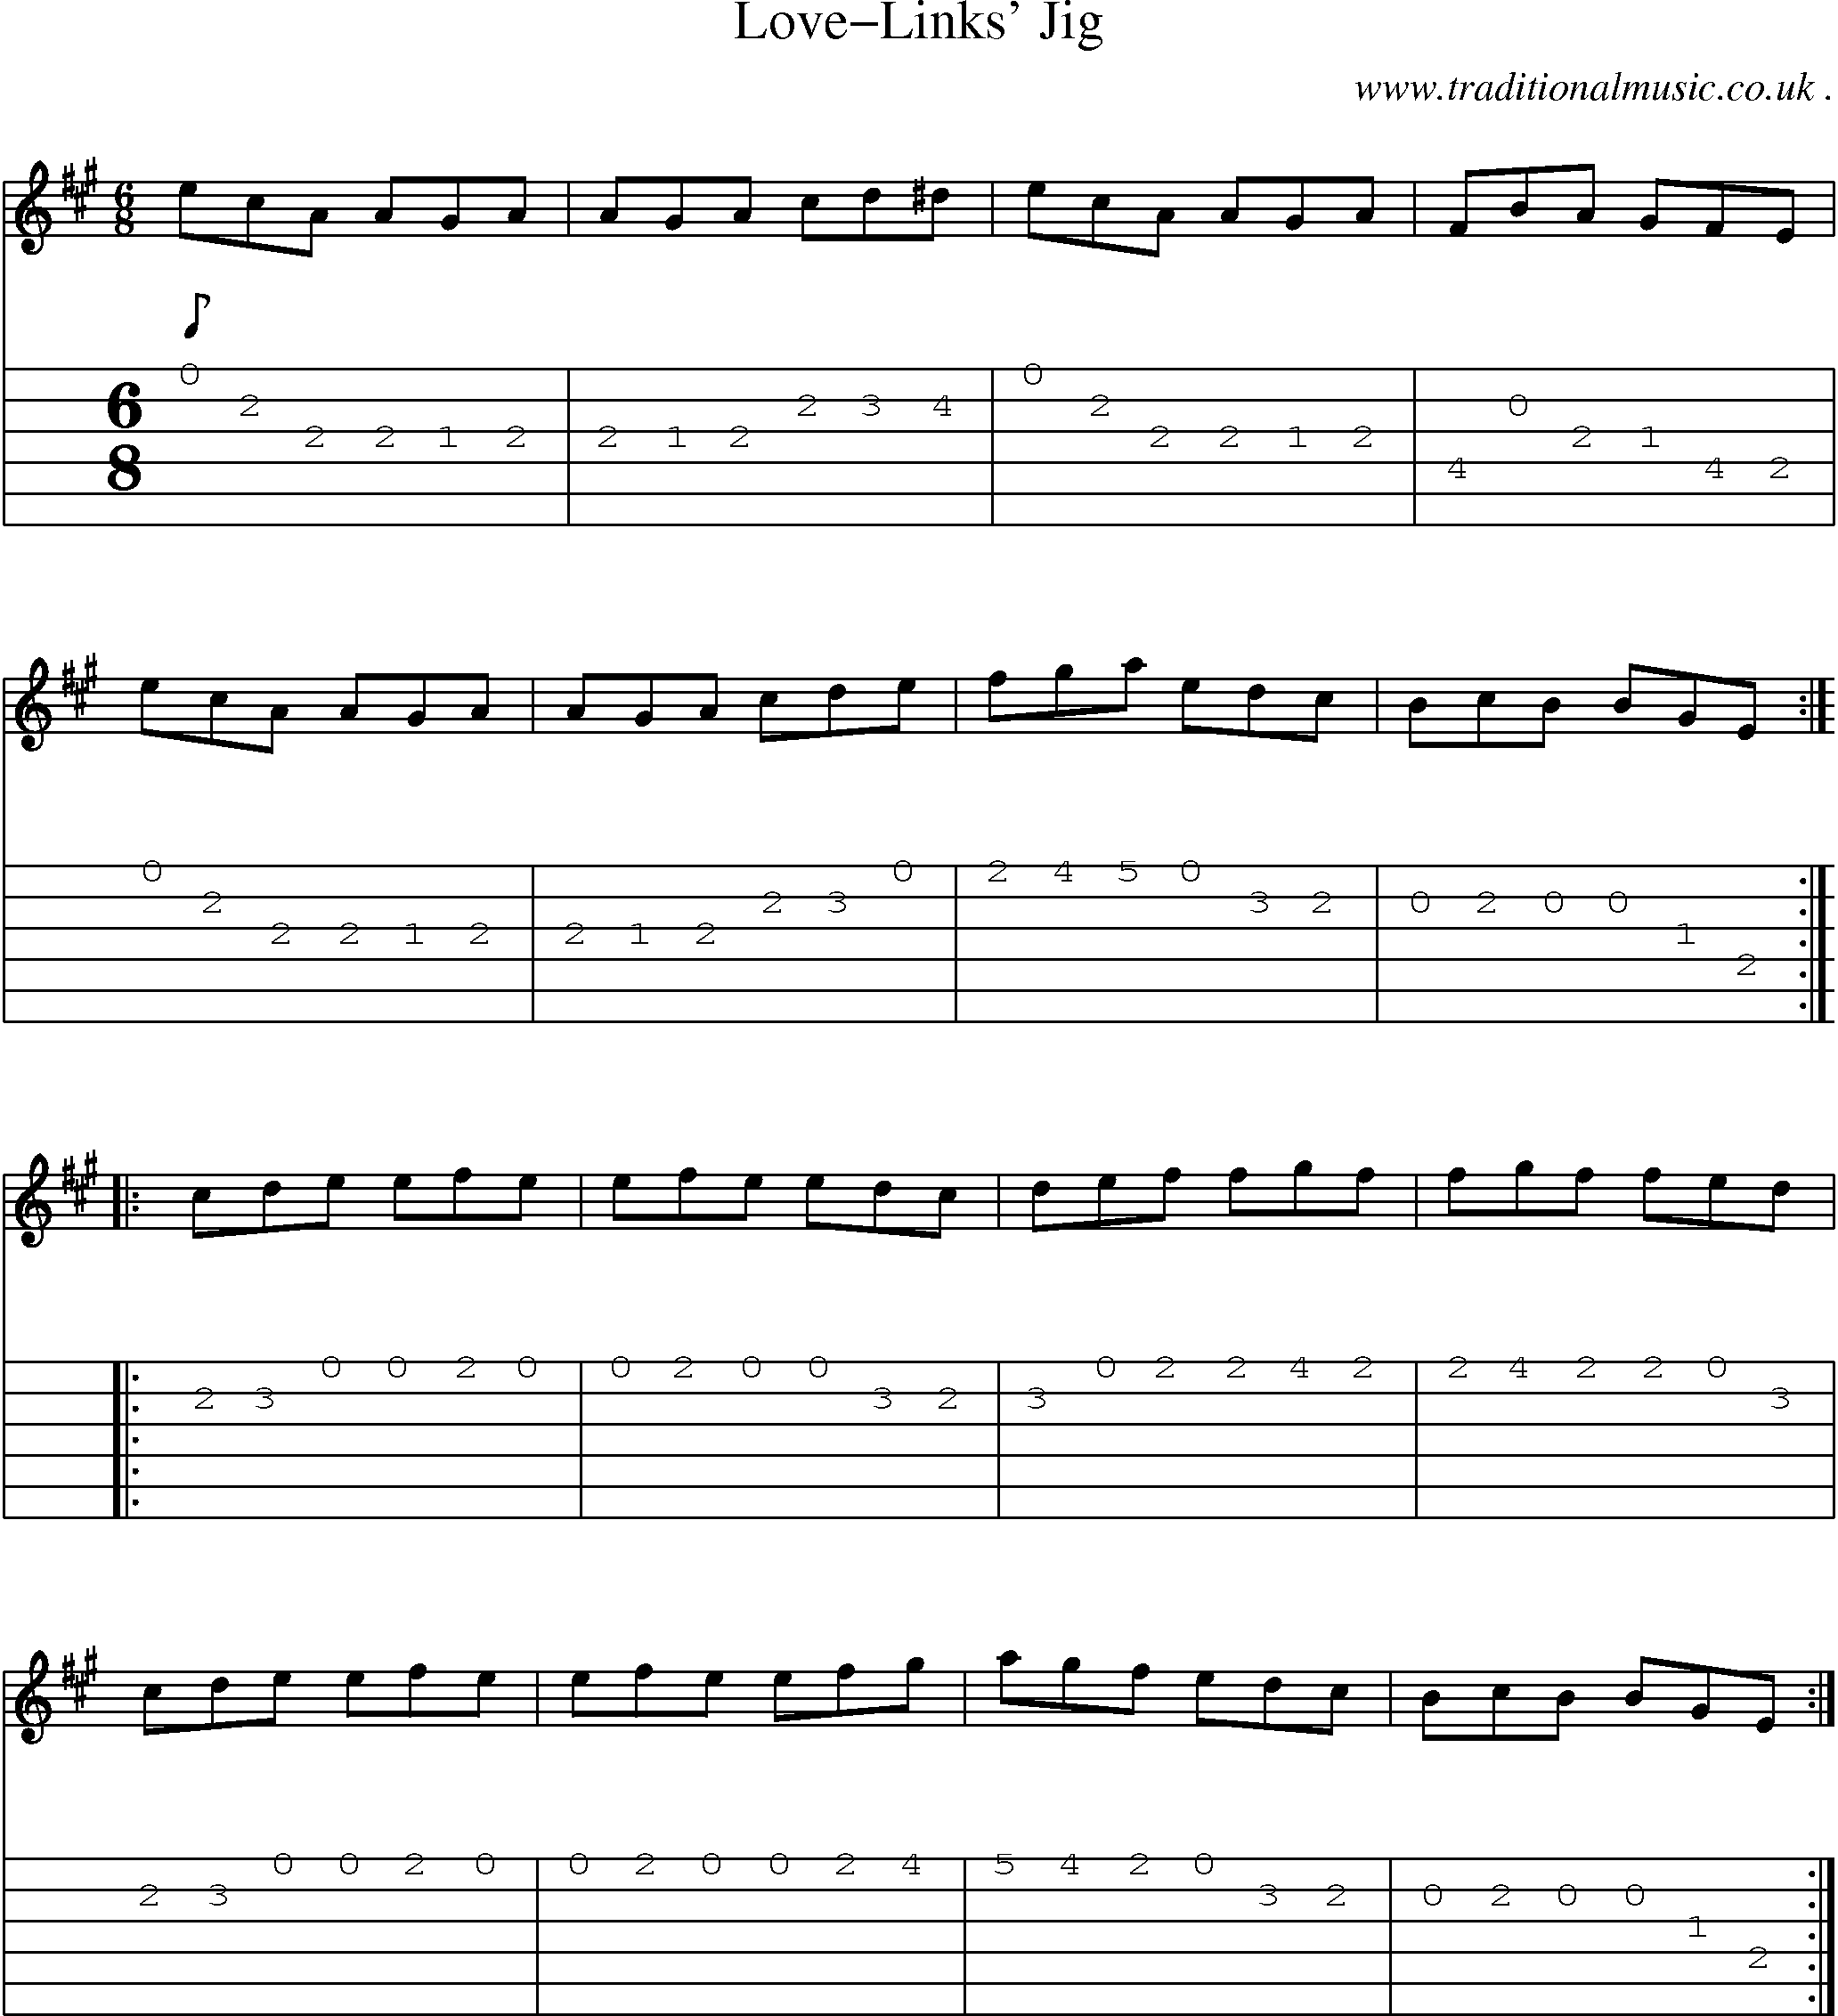 Sheet-Music and Guitar Tabs for Love-links Jig